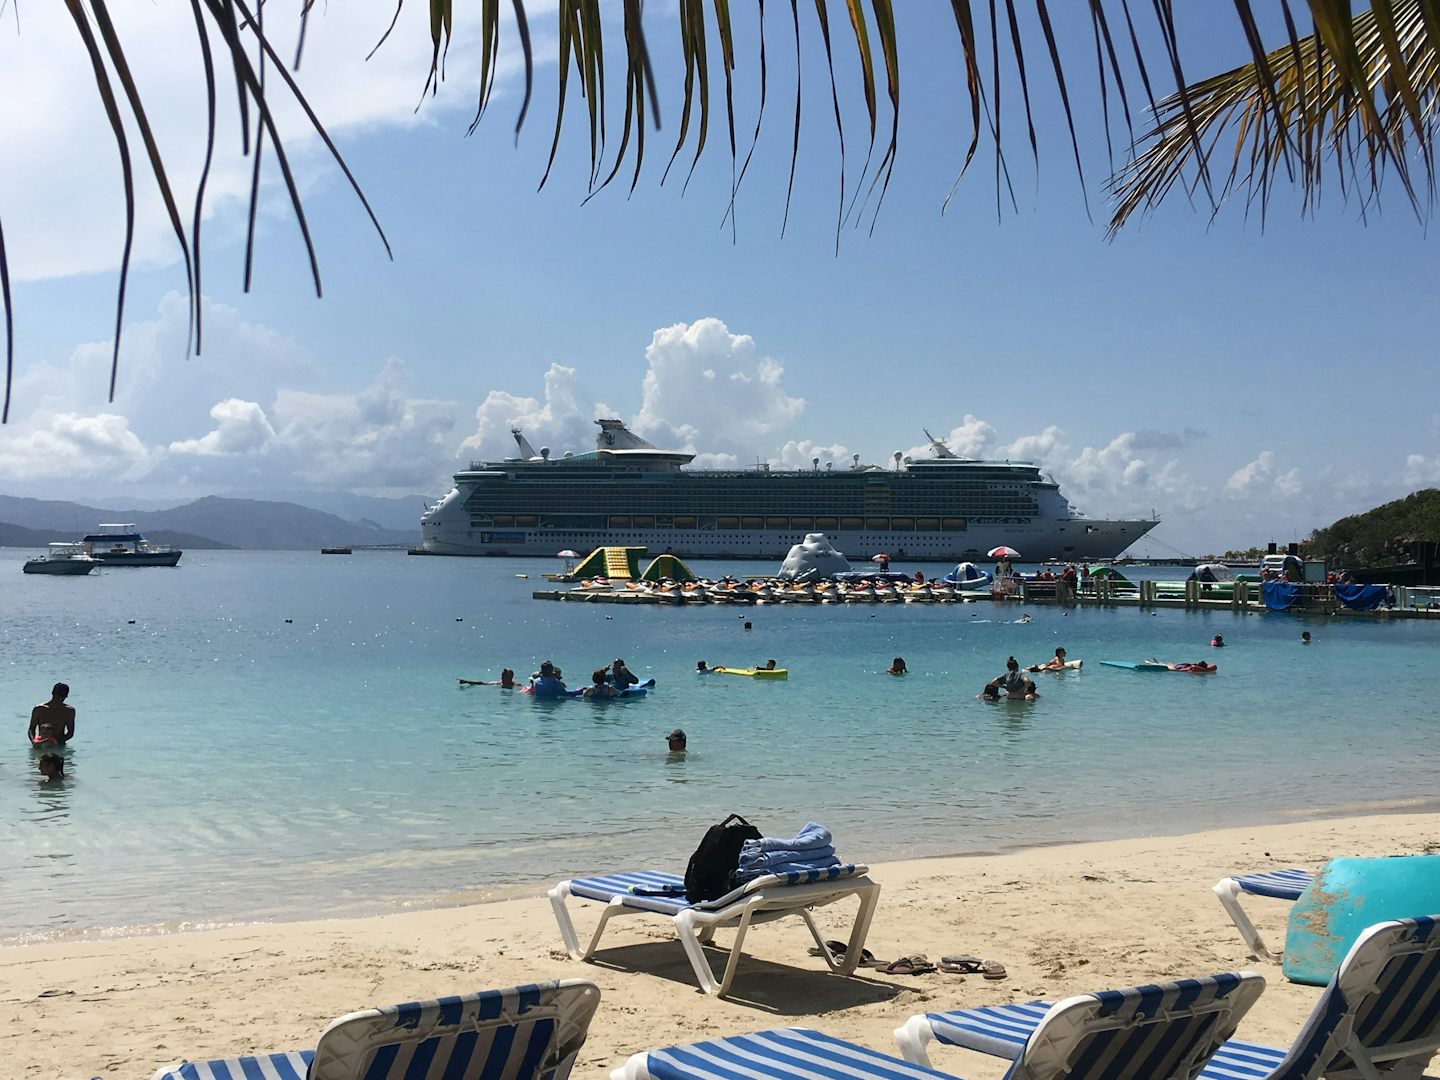 The ship from the beach